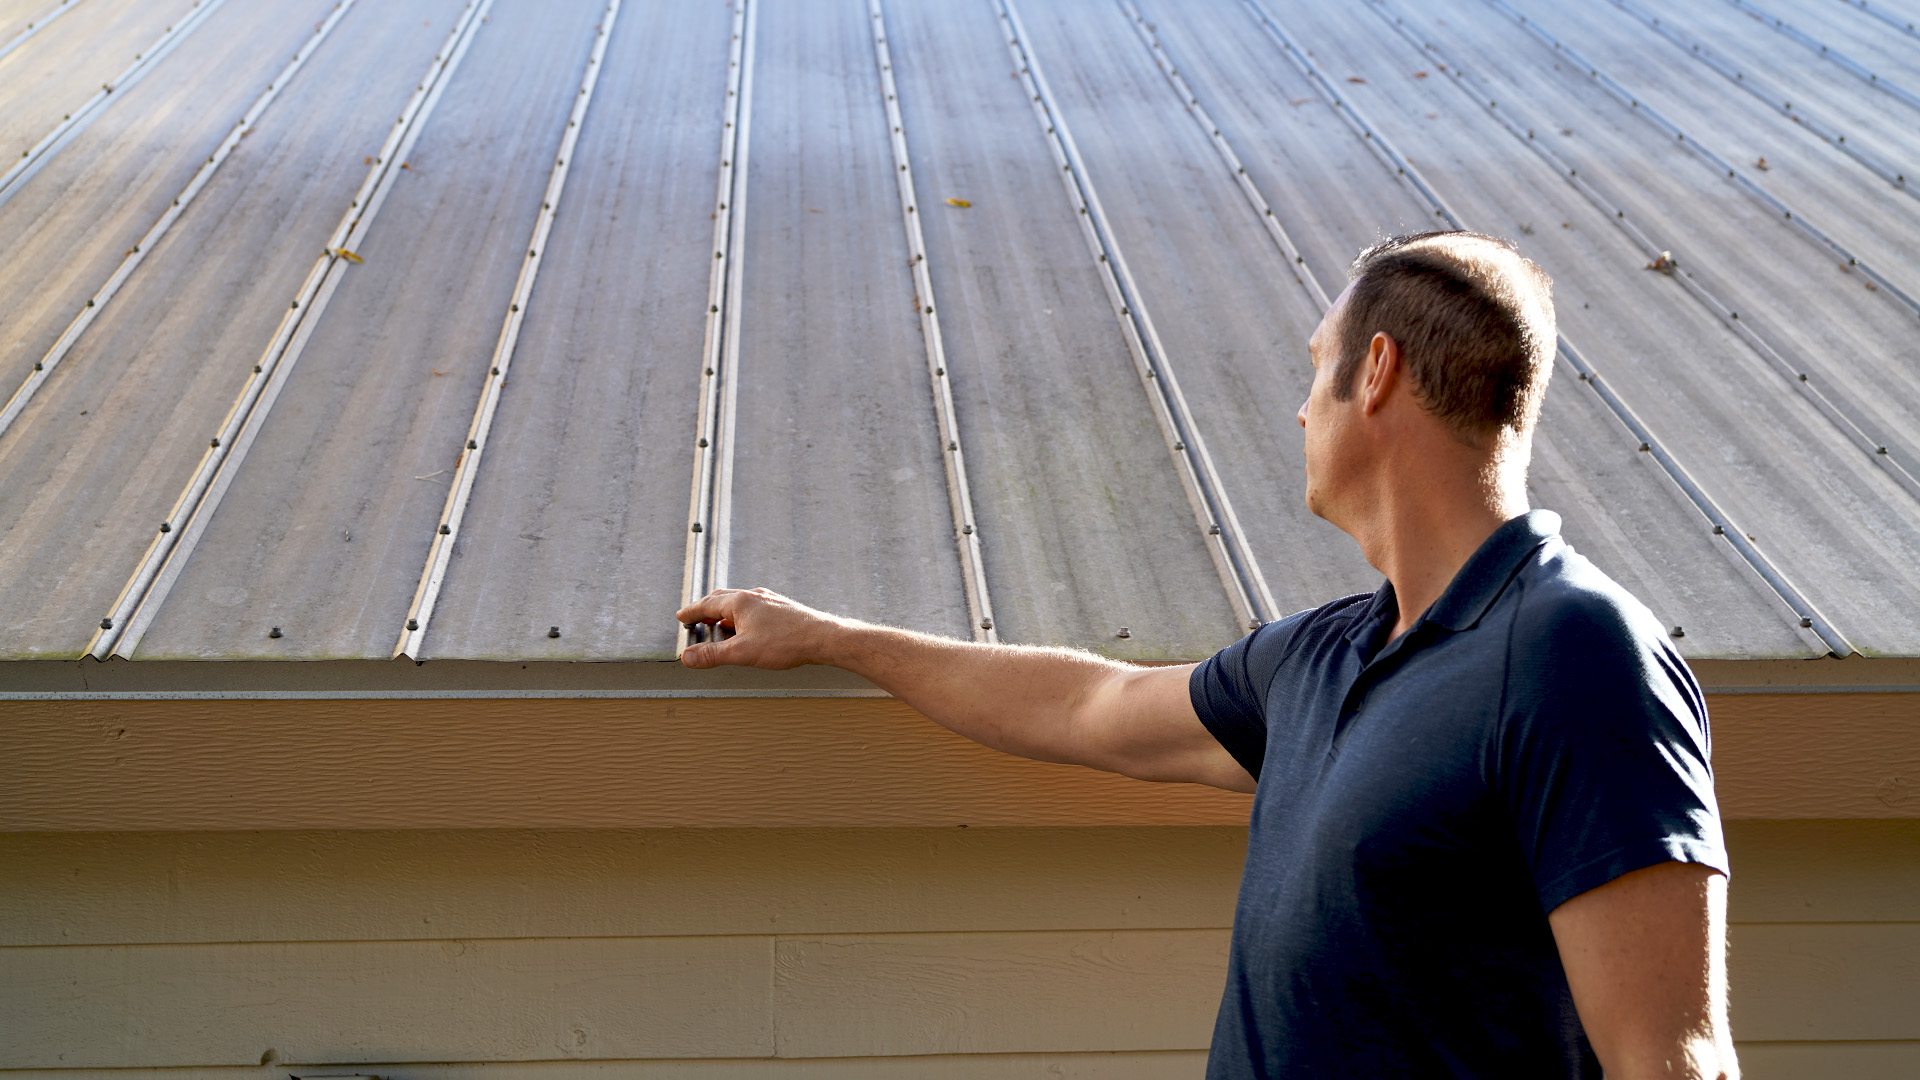 Can you ask your insurance company to re-inspect your roof damage if they underpaid or denied you?